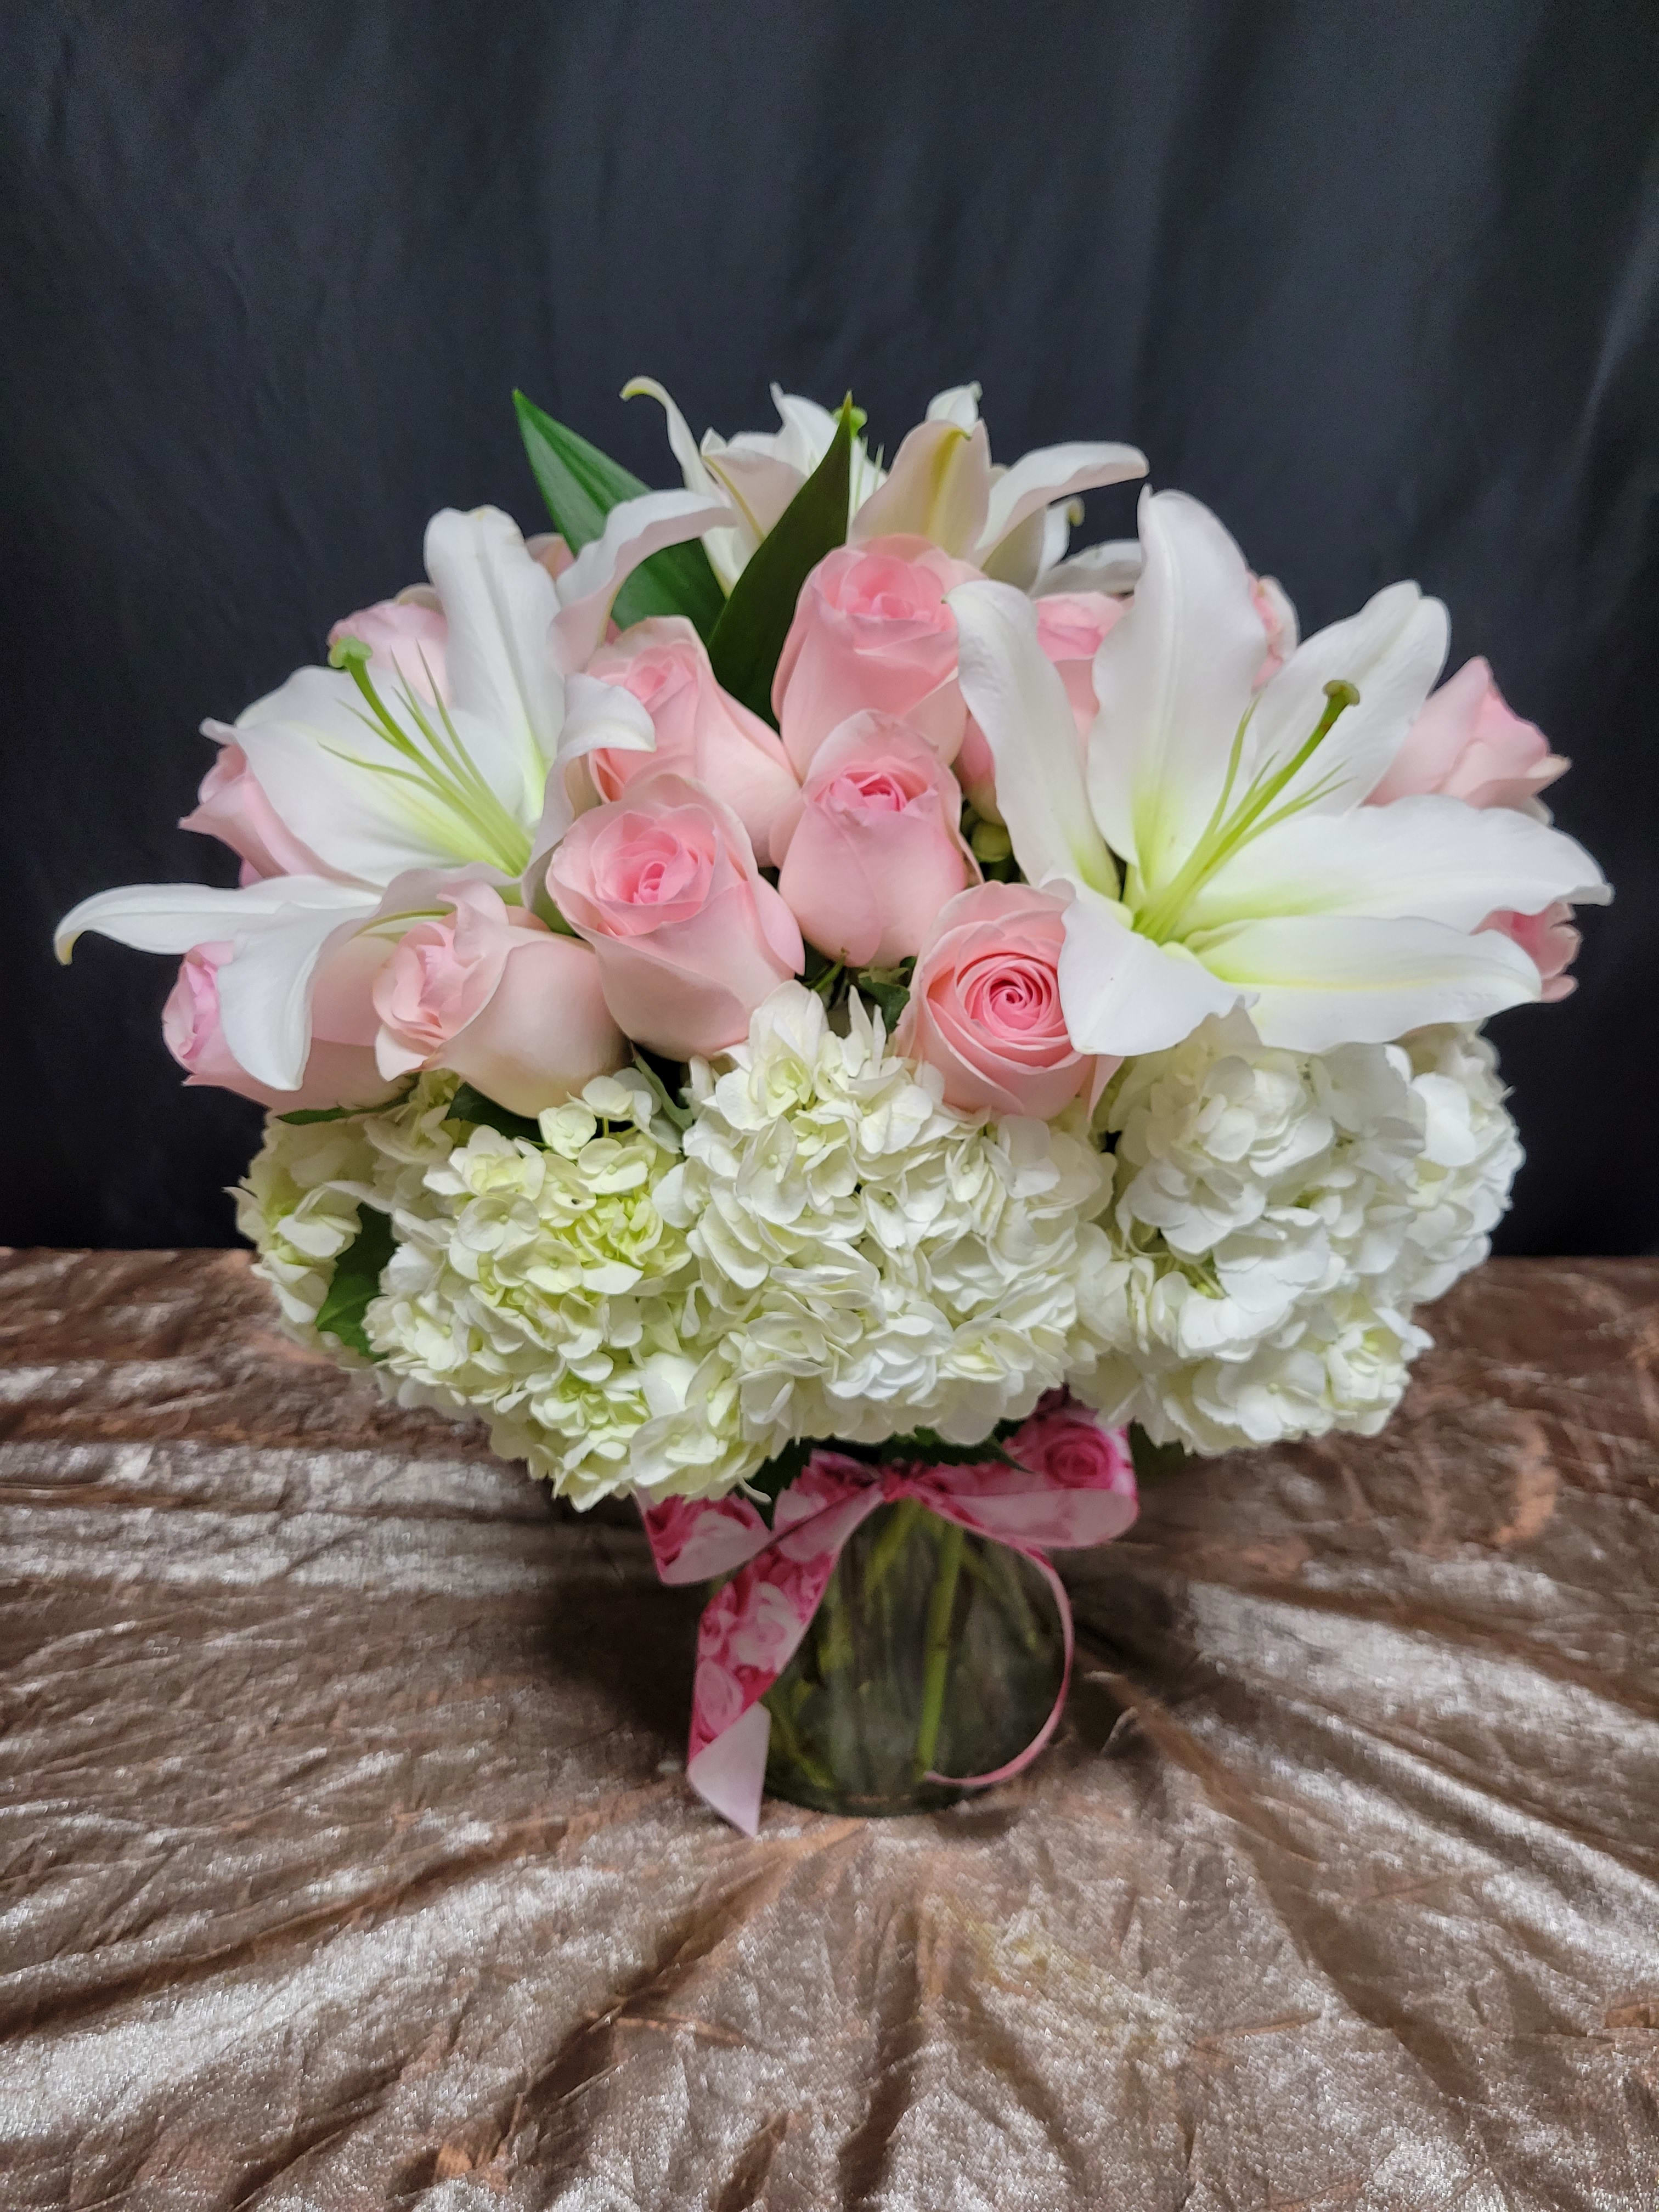 Delicate Romance - This centerpiece creates a romantic atmosphere with blush roses, fluffy white hydrangeas, lisianthus, and various dancing greeneries.  